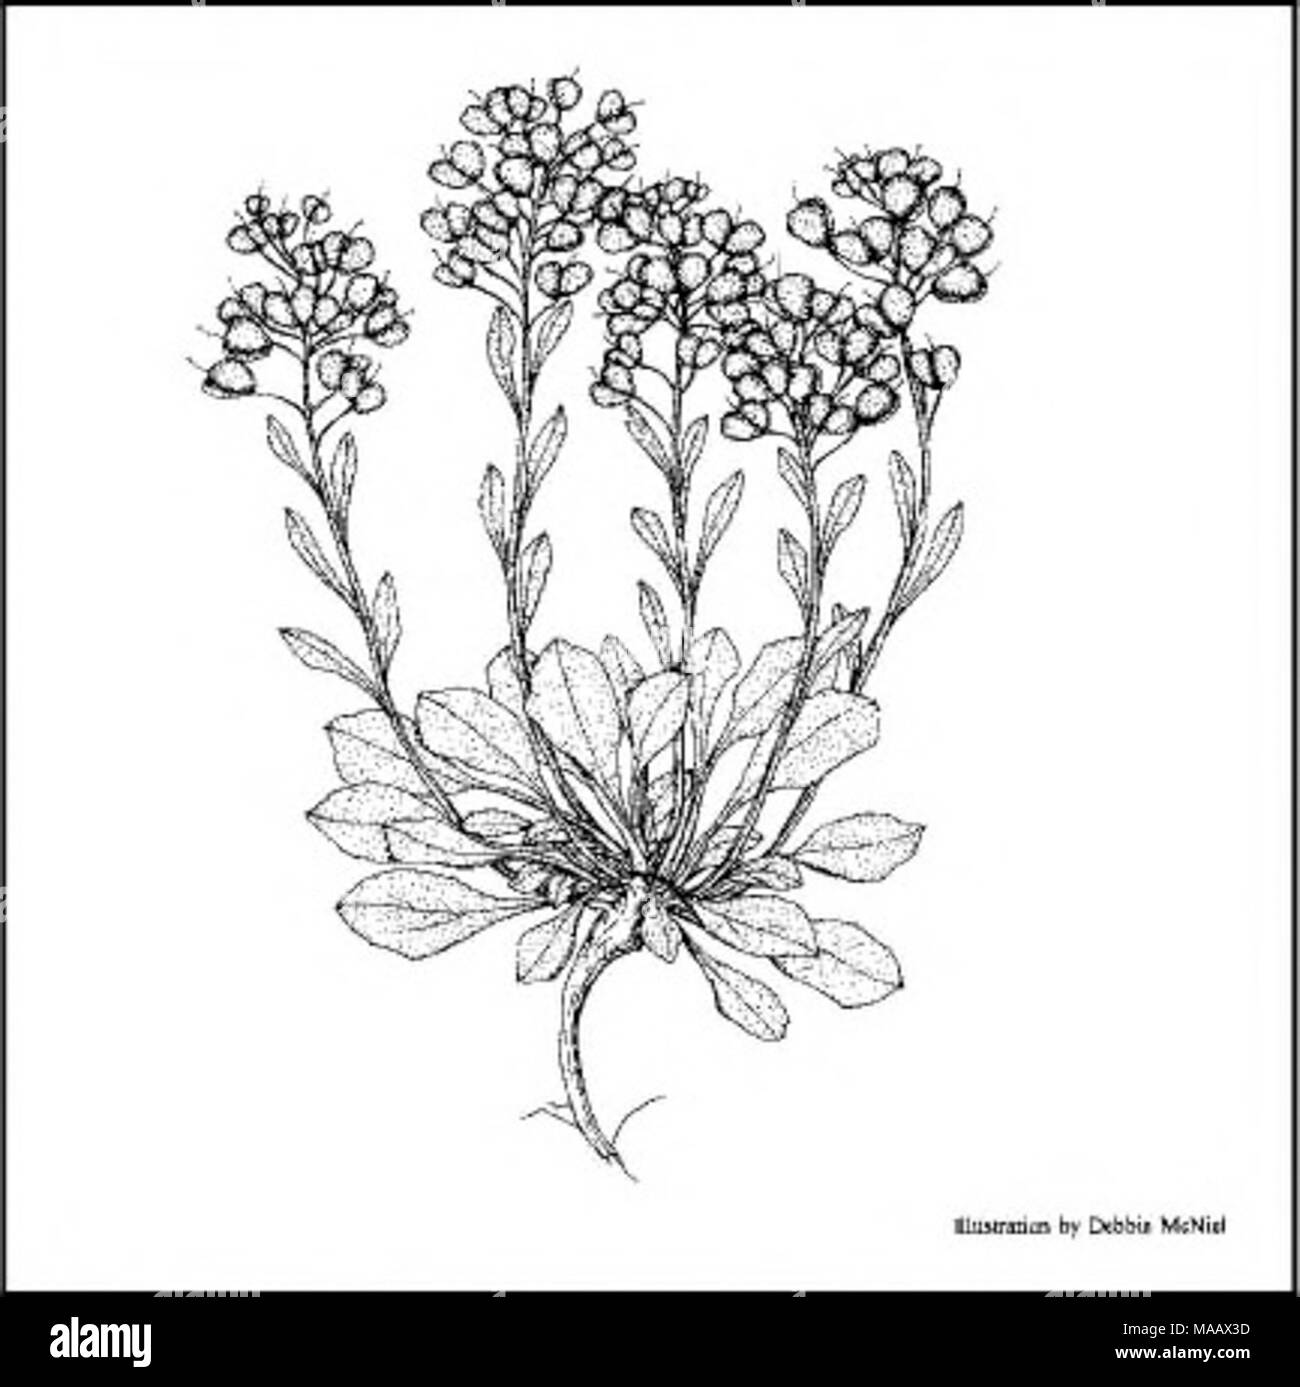 . Plant species of concern and plant associations of Powder River county, Montana  . Figure 26. Illustration of Physaria brassicoides petals that are 9 to 12 mm long and 4 separate sepals. The ascending, inflated fmits are 1 to 2 cm long, at least as wide, and flattened on top. They are 2-lobed witli the locules (lobes) more deeply defined above than below. There are 2 ovules in each of the locules, attached at the top of the replum (suture between tlie two locules), and tlie replum has a linear outline. The style is 6 to 9 mm long. Flowering in May-early June, fruiting in June-July. There are Stock Photo